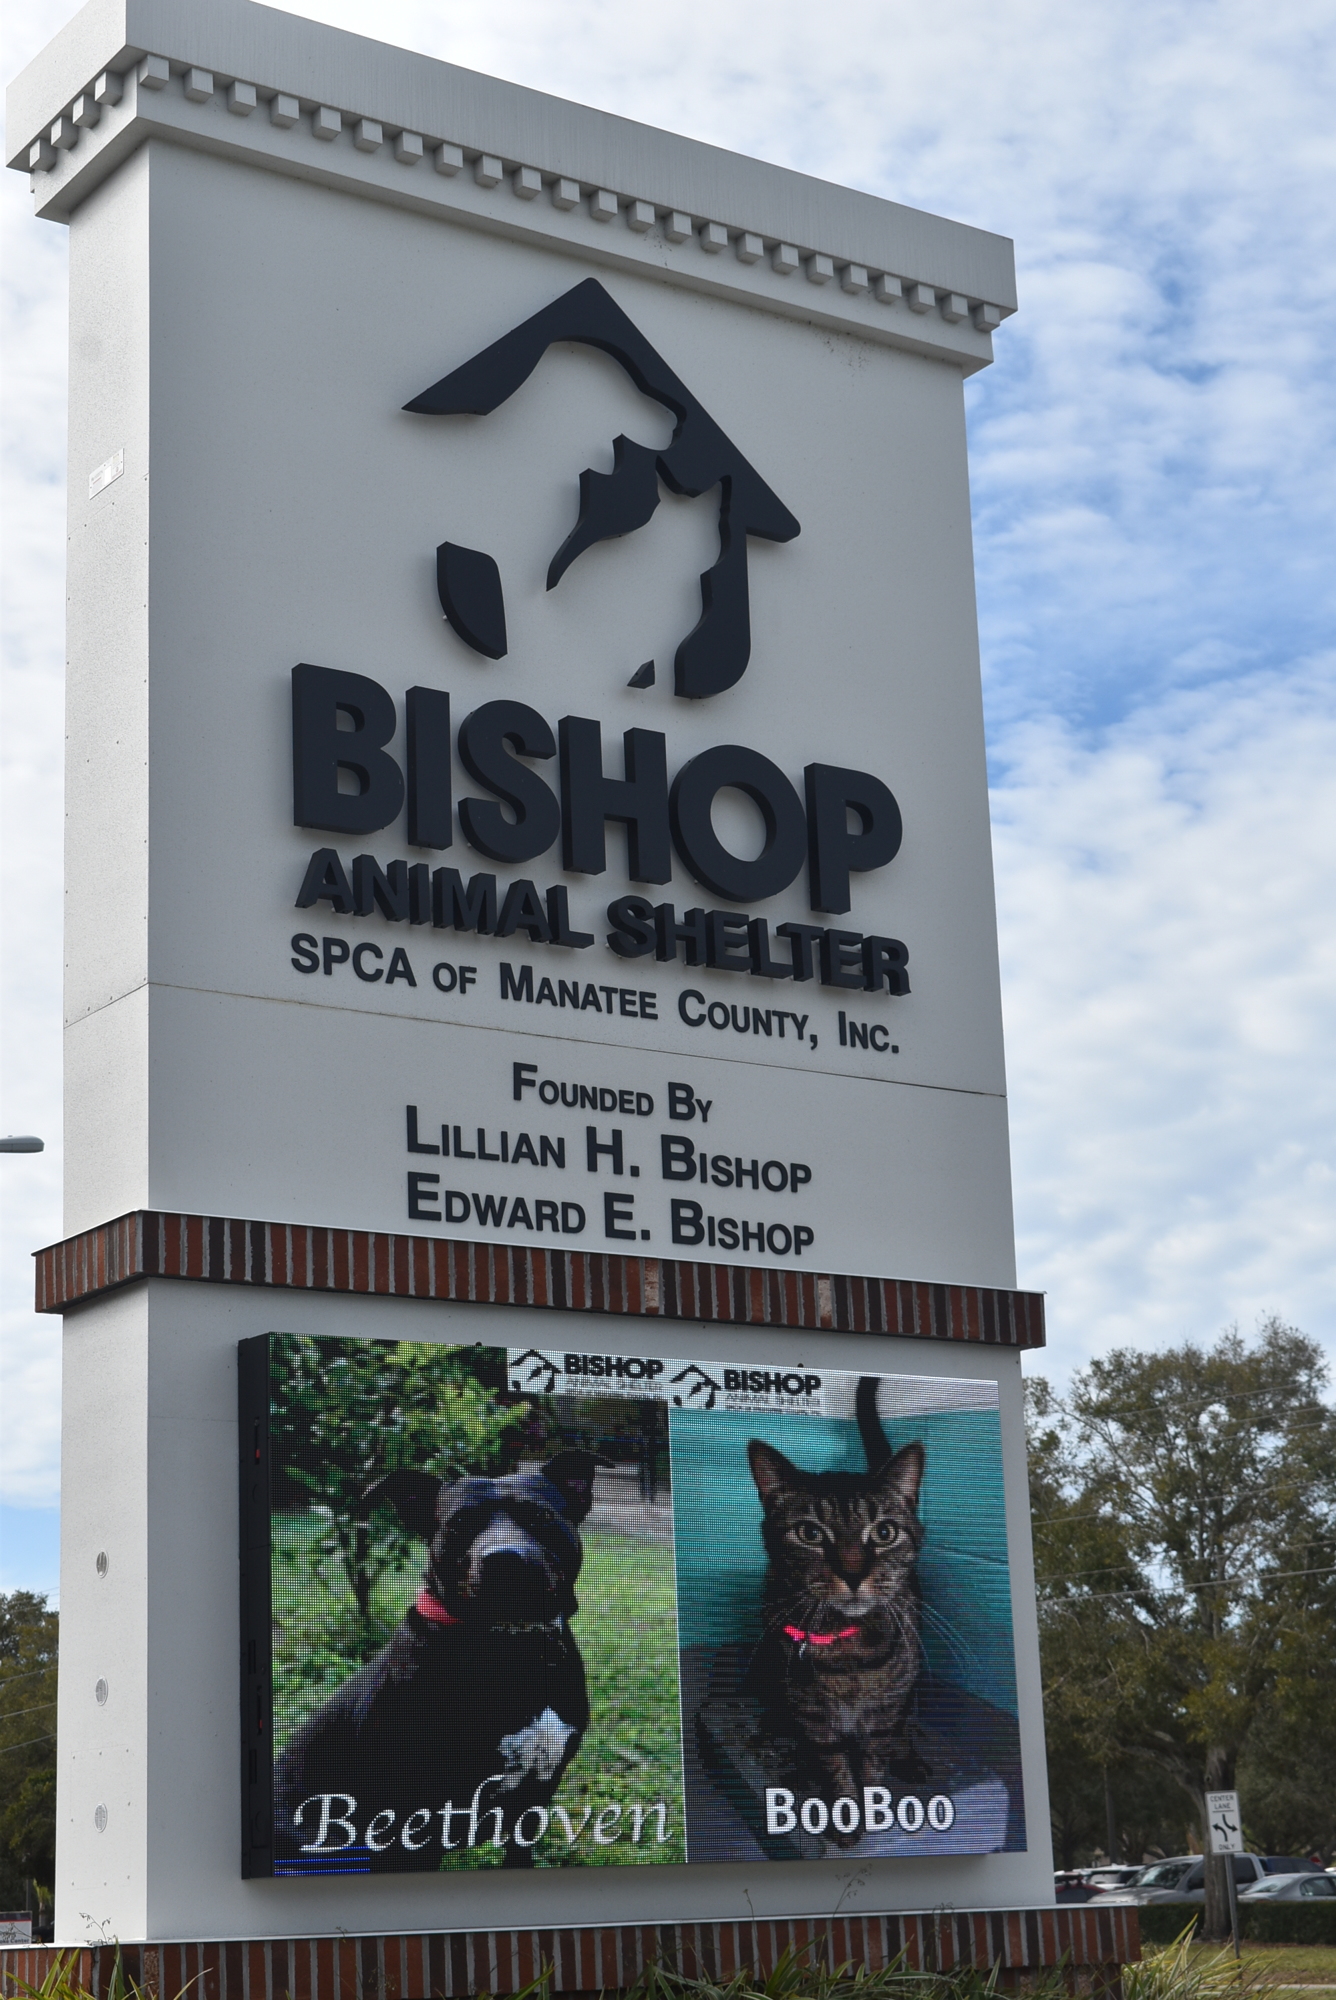 The Mary E. Parker Foundation owns Bishop Animal Shelter, which was founded by Parker’s adopted parents, Lillian and Edward Bishop. The foundation wants to donate the shelter to Manatee County